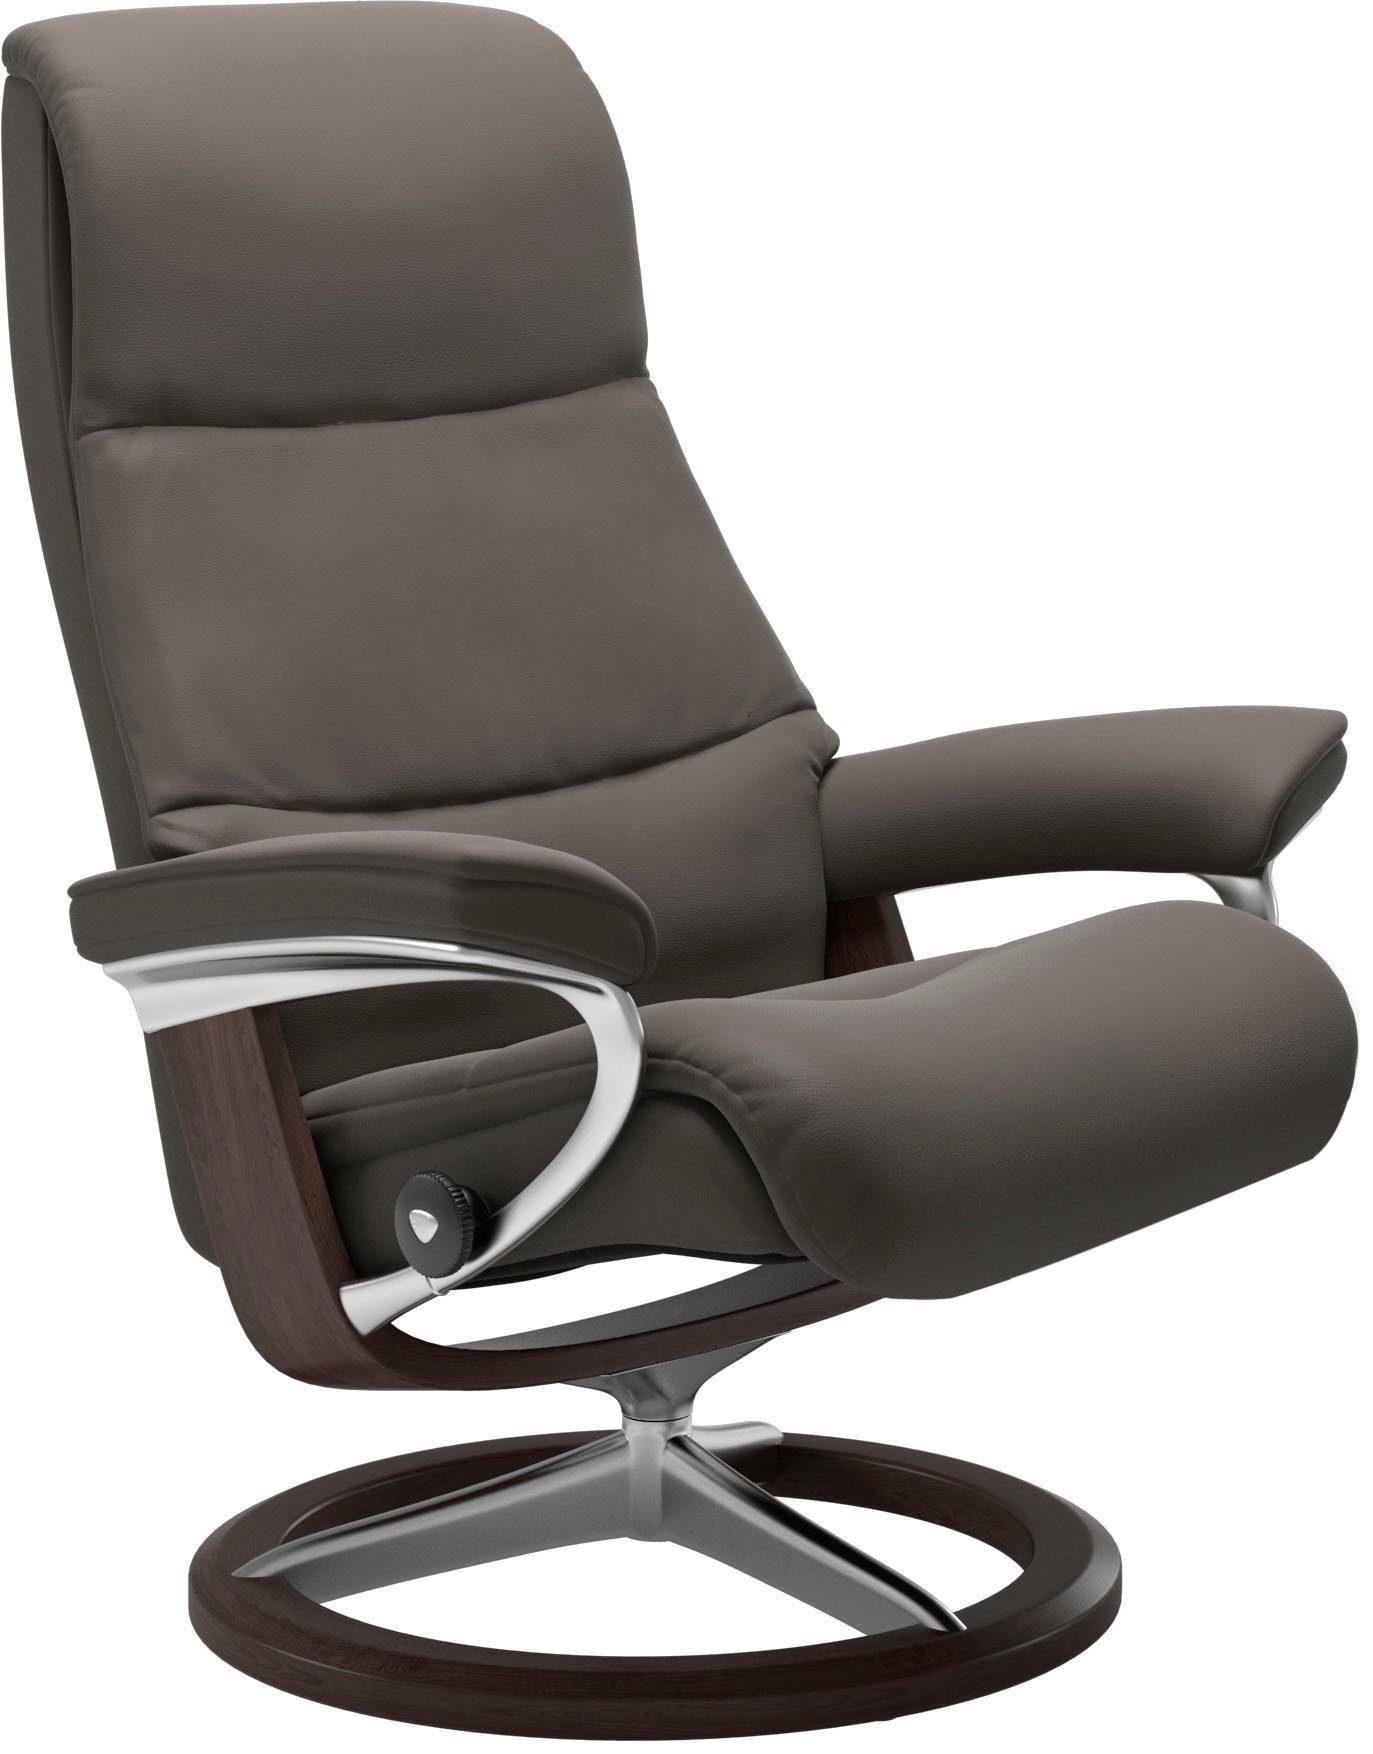 Wenge Base, Größe View, Signature S,Gestell Stressless® Relaxsessel mit